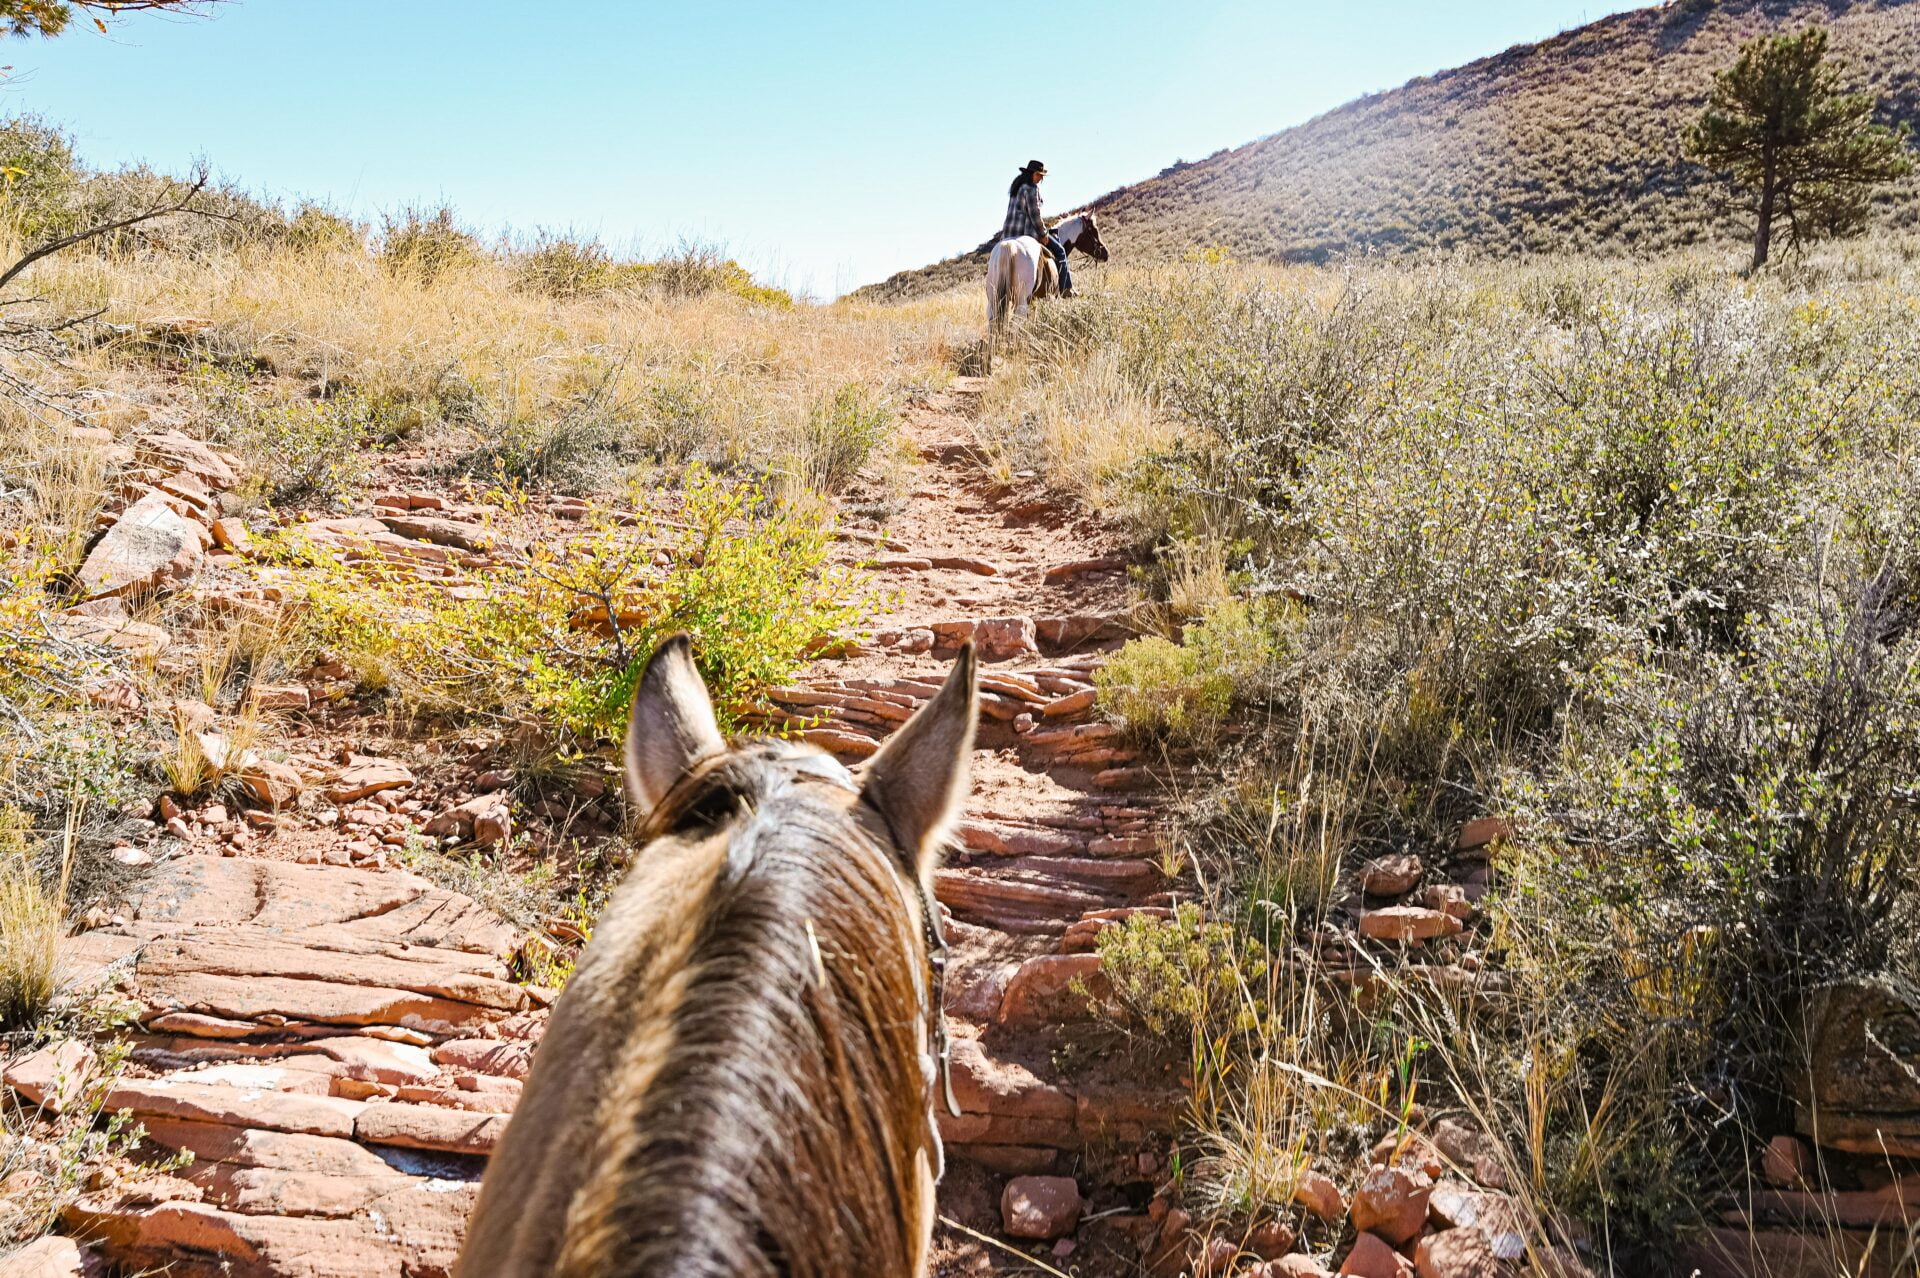 photo taken on the back of a horse, looking up a trail where the wrangler on her horse looks back